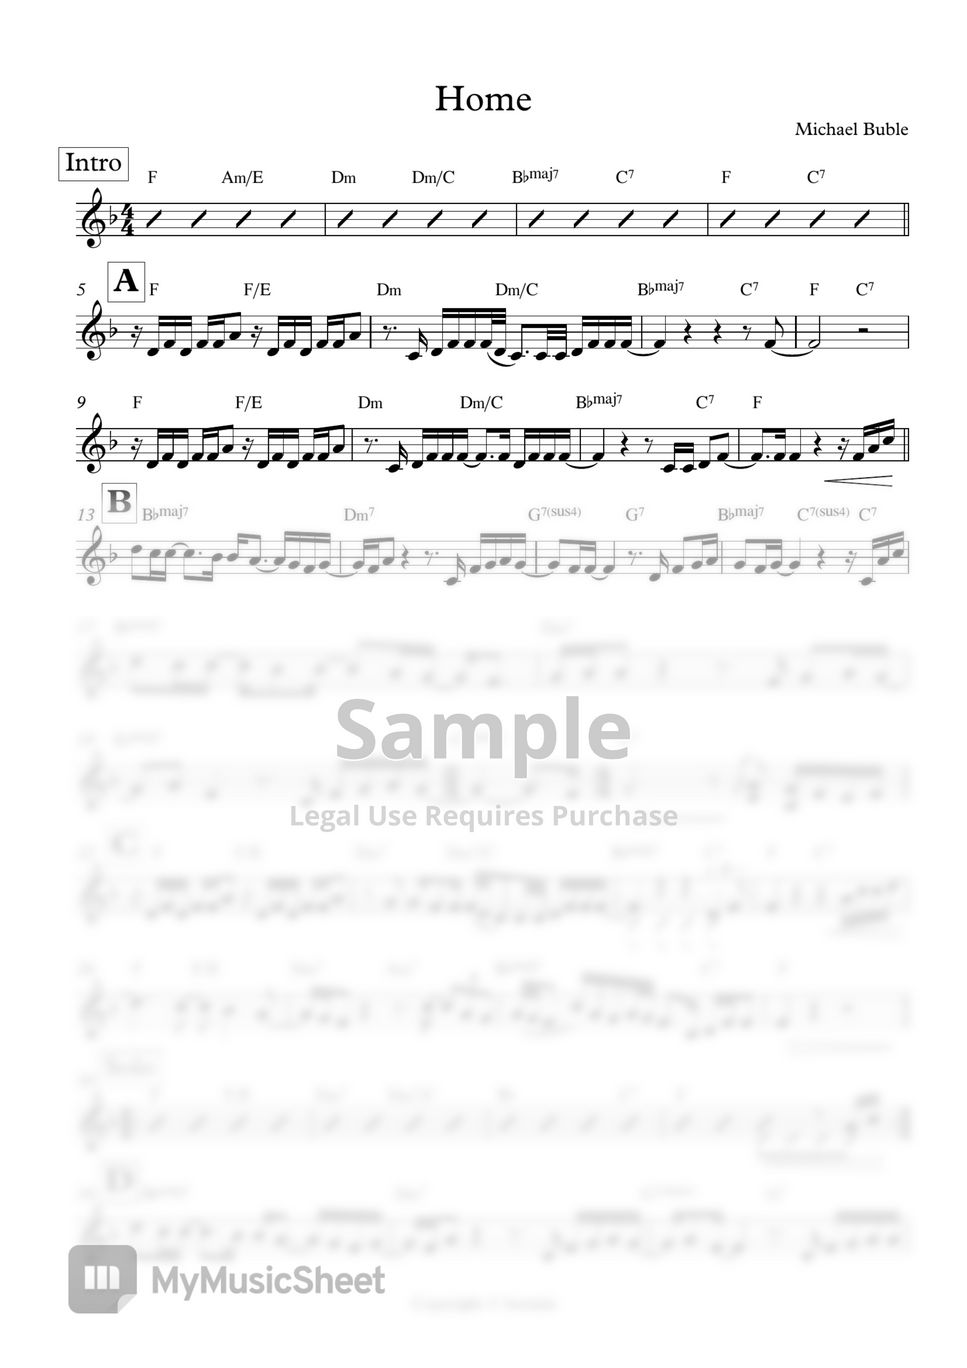 Michael Buble - Home by SheetMusicOnly1page